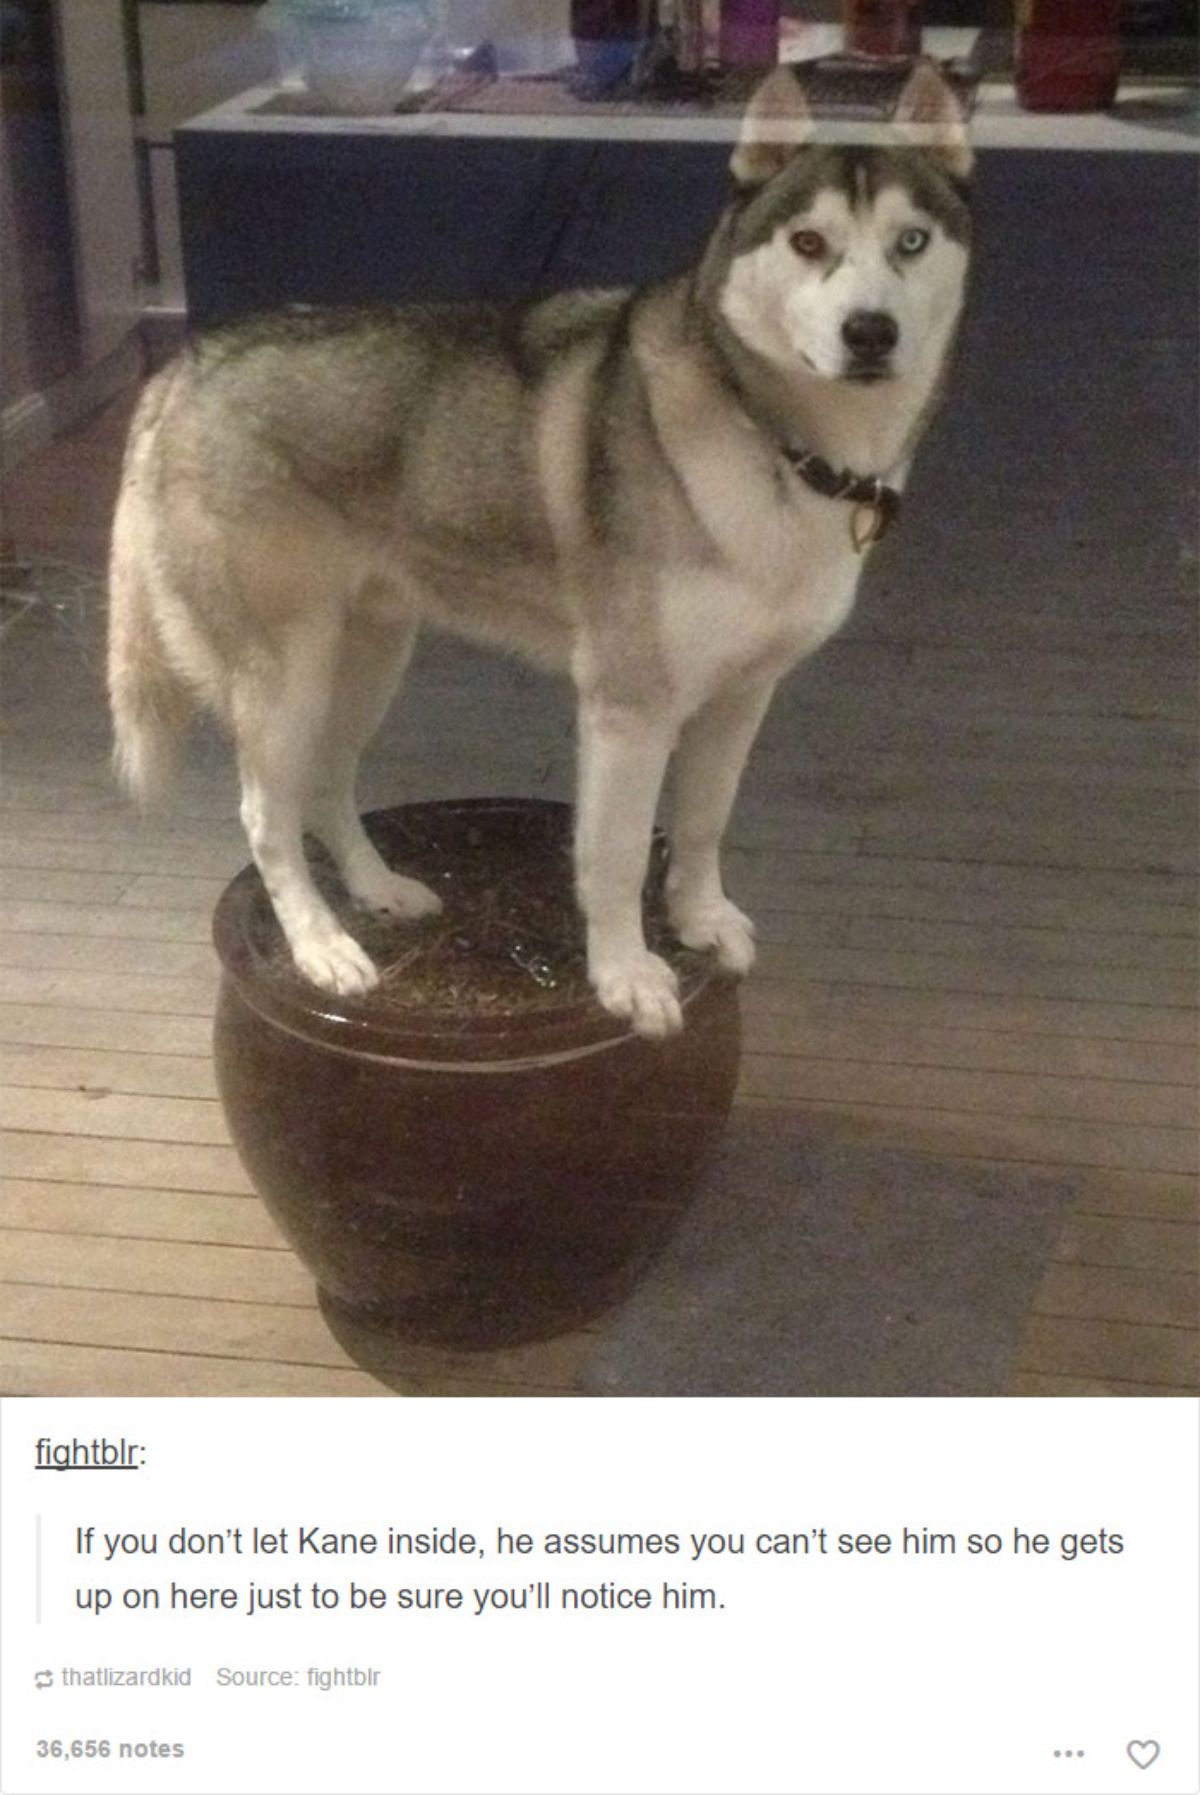 tumblr post of black ad white husky on a brown stool with caption saying if you don't let him in, he thinks he can't be seen and will stand on the stool to be seen